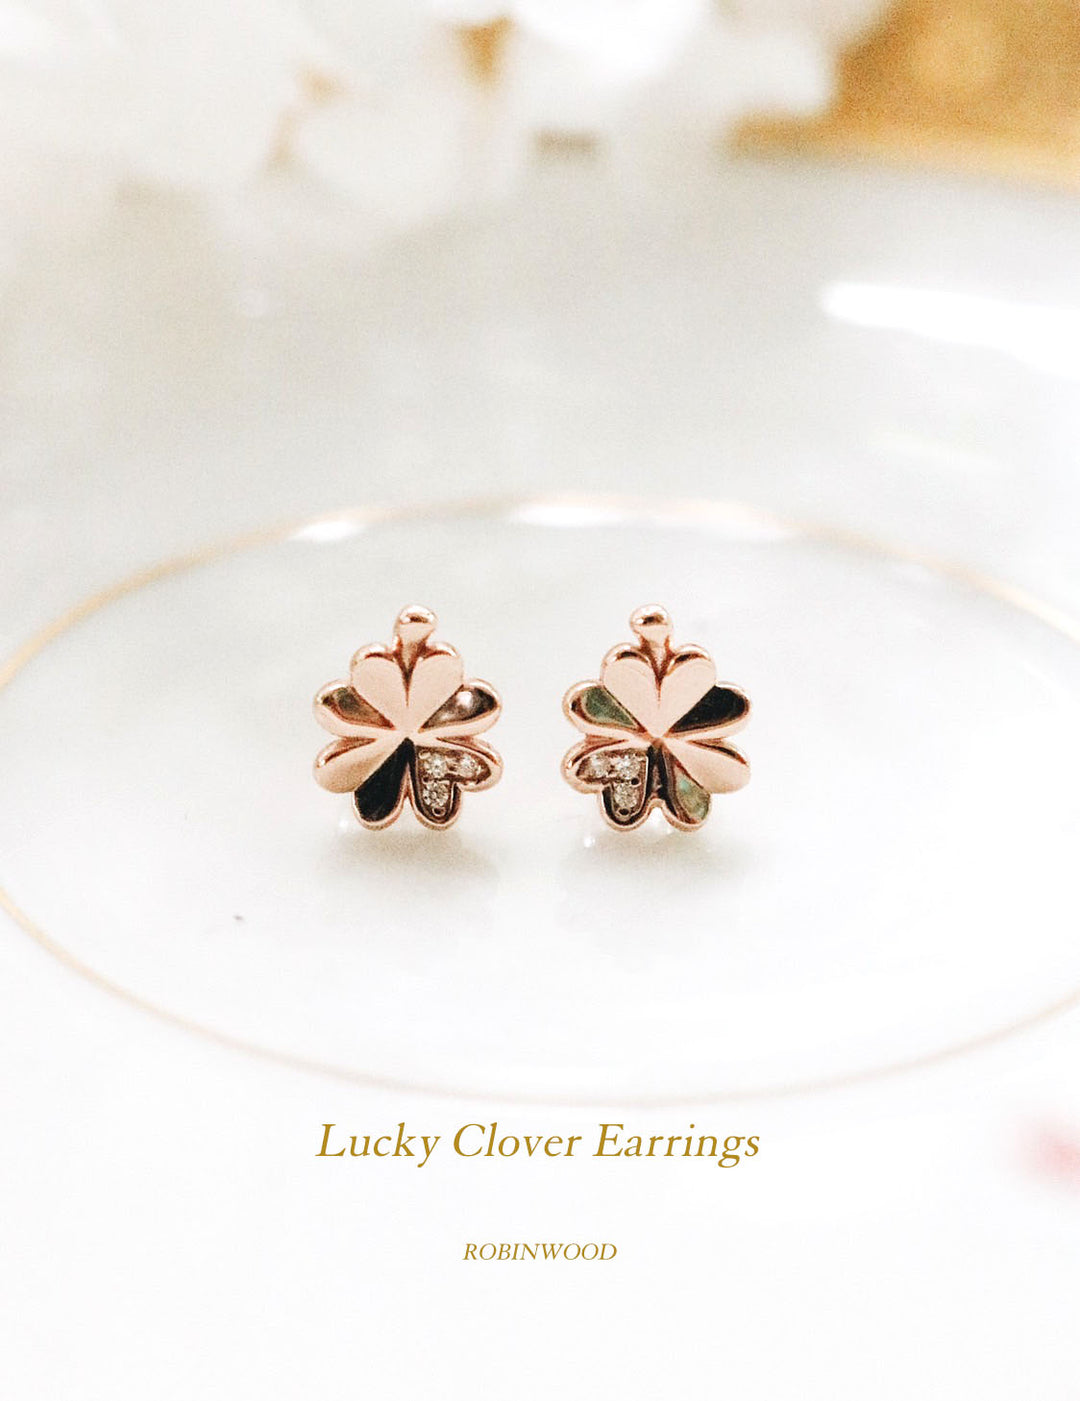 " Limited Series " Lucky Clover Earrings, Robinwood, Limited 88 Pieces